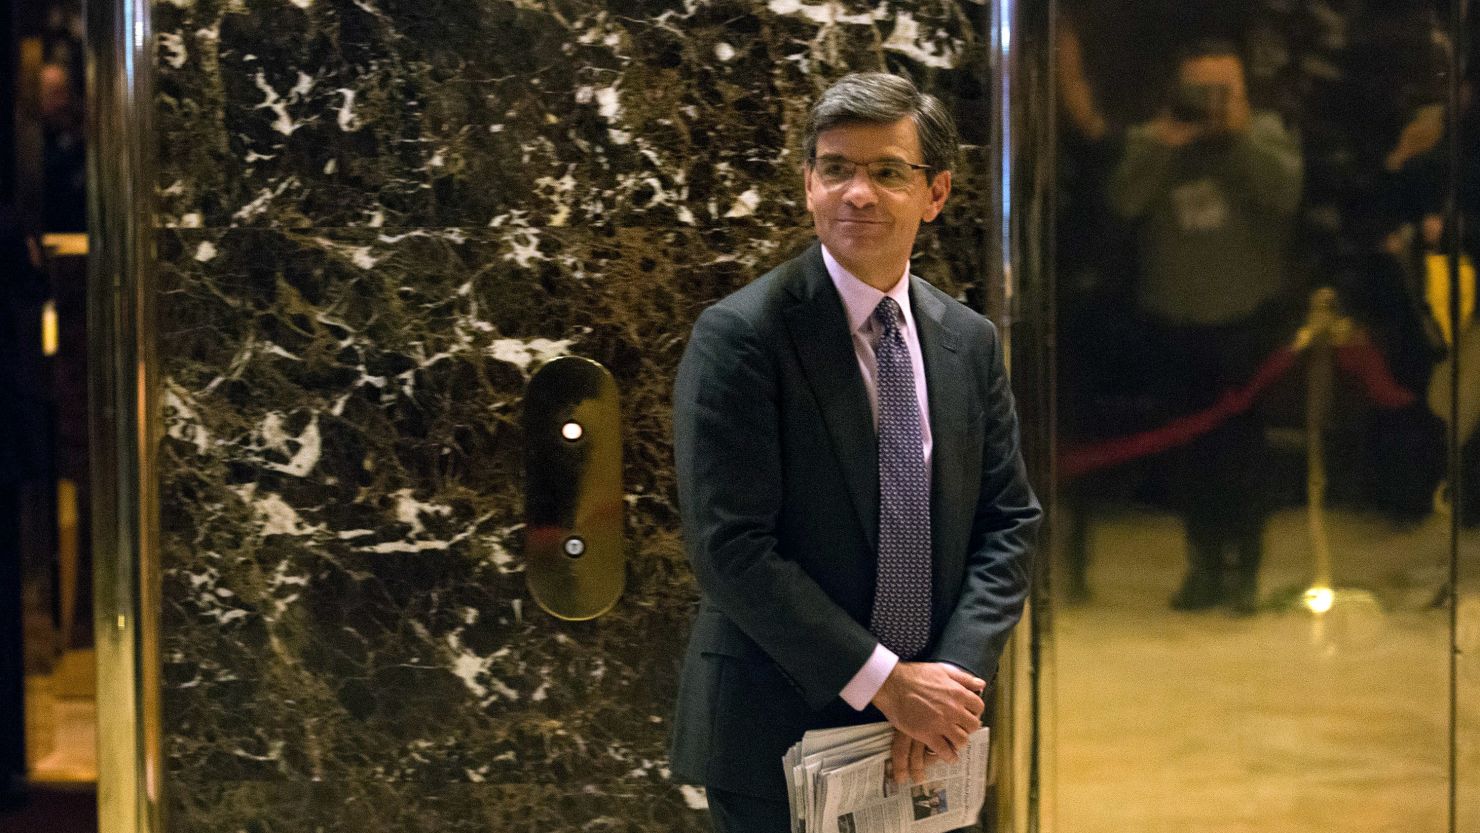 Journalist George Stephanopoulos emerges from the elevators following a visit to Trump Tower on November 21, 2016 in New York City.